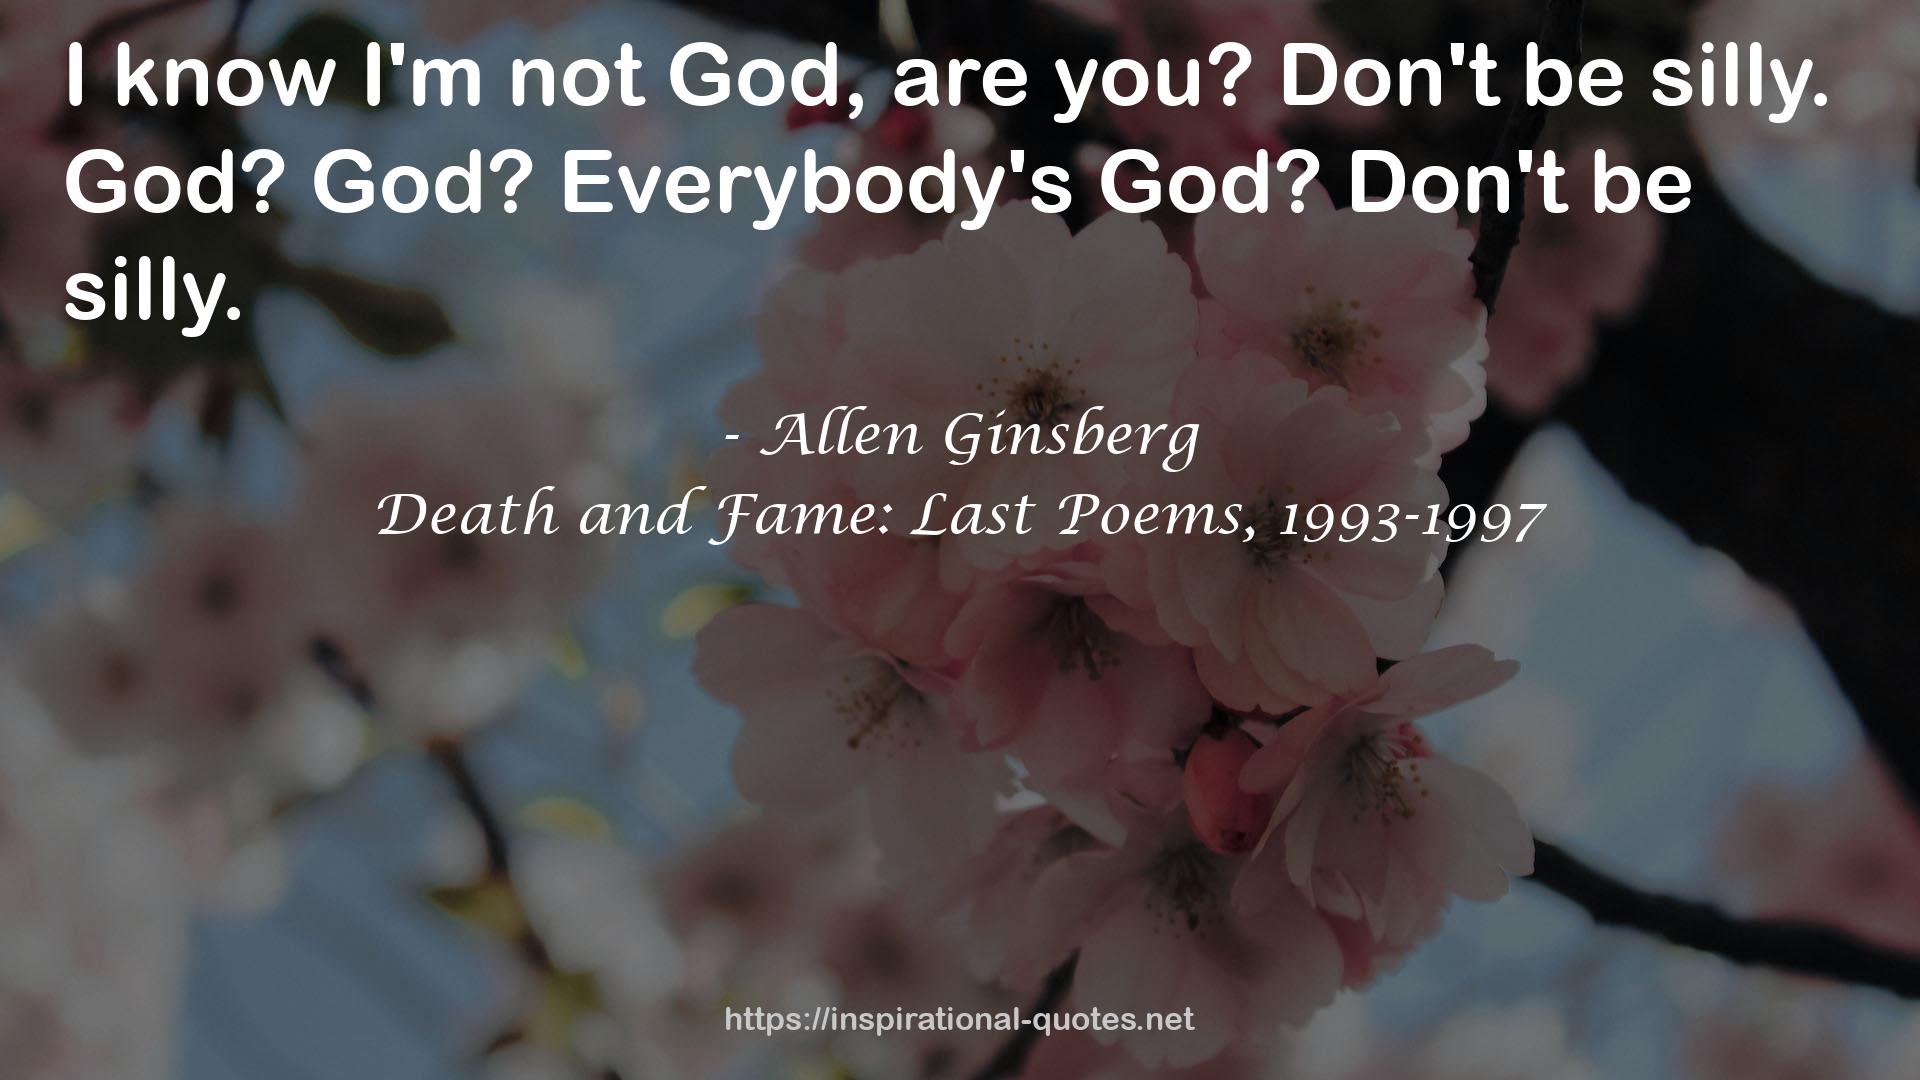 Death and Fame: Last Poems, 1993-1997 QUOTES